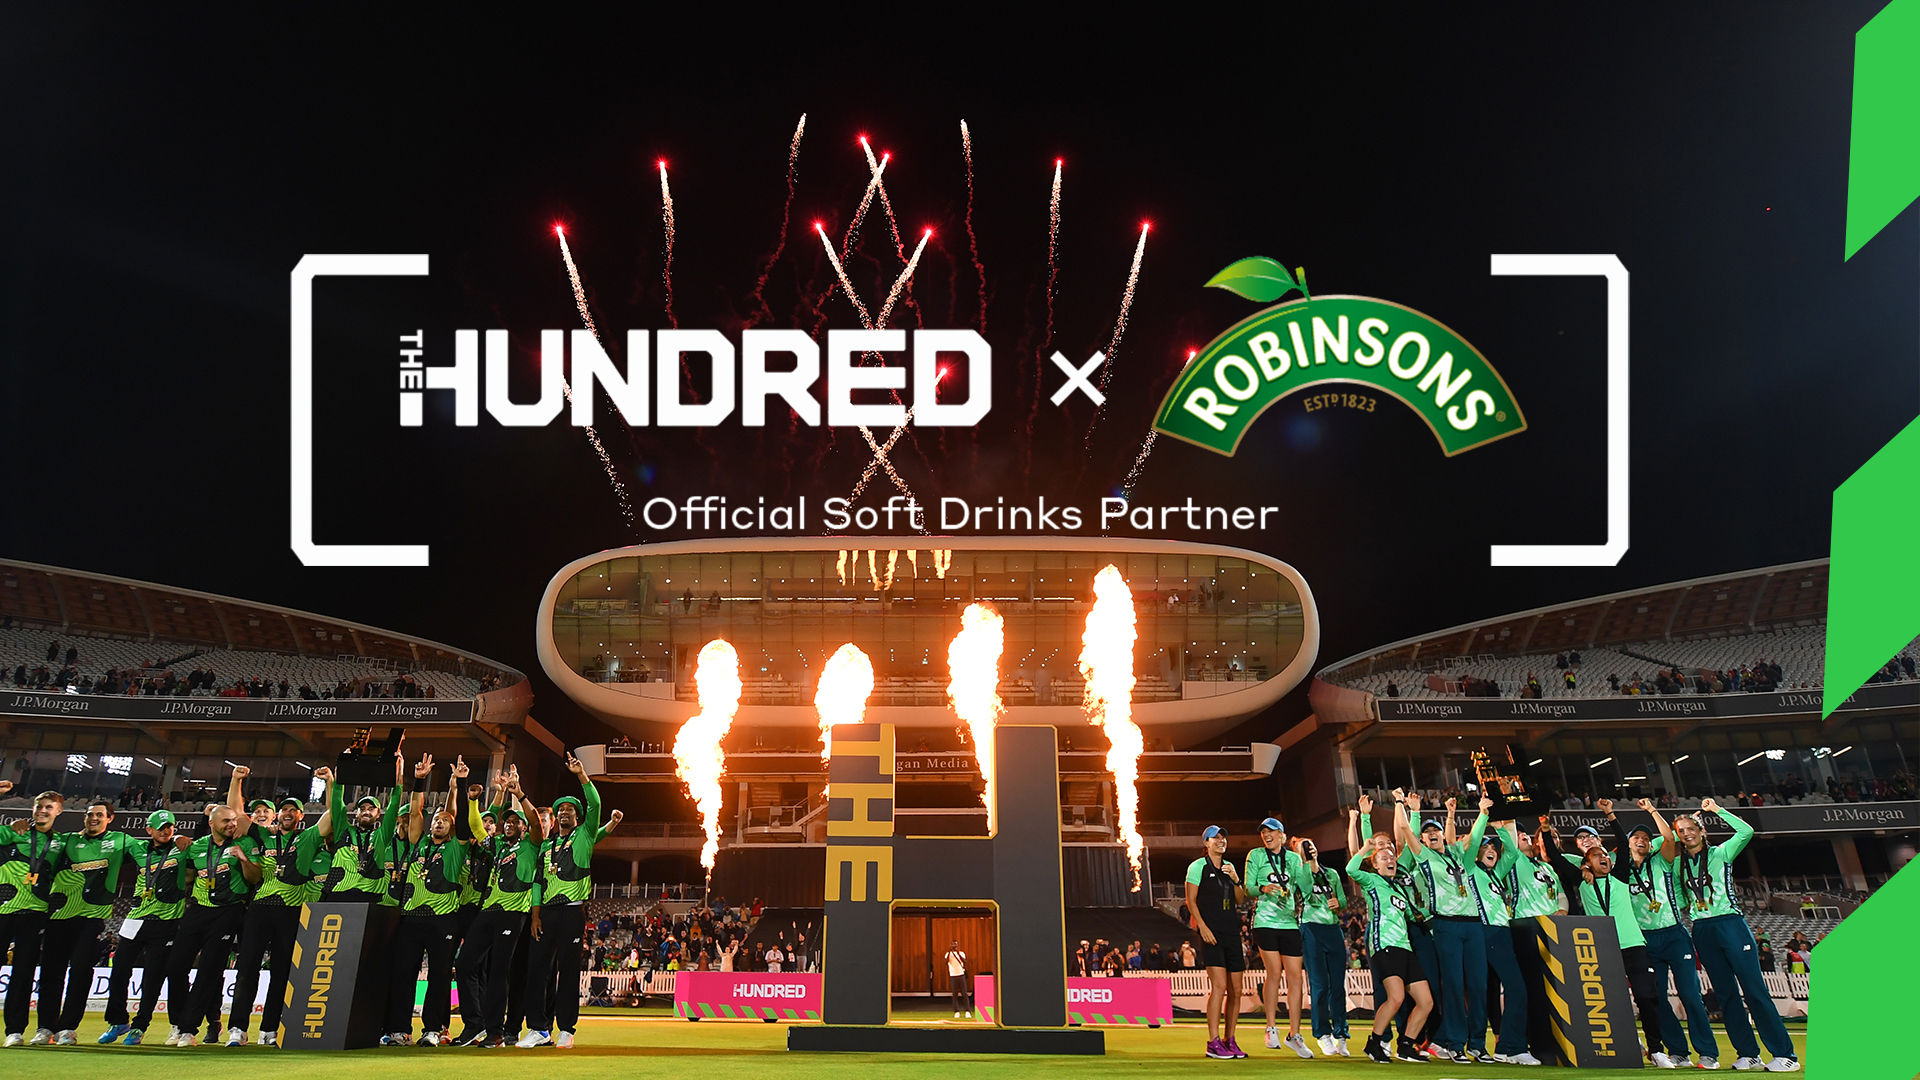 Robinsons Ready-To-Drink partners with The Hundred to grow summer sales